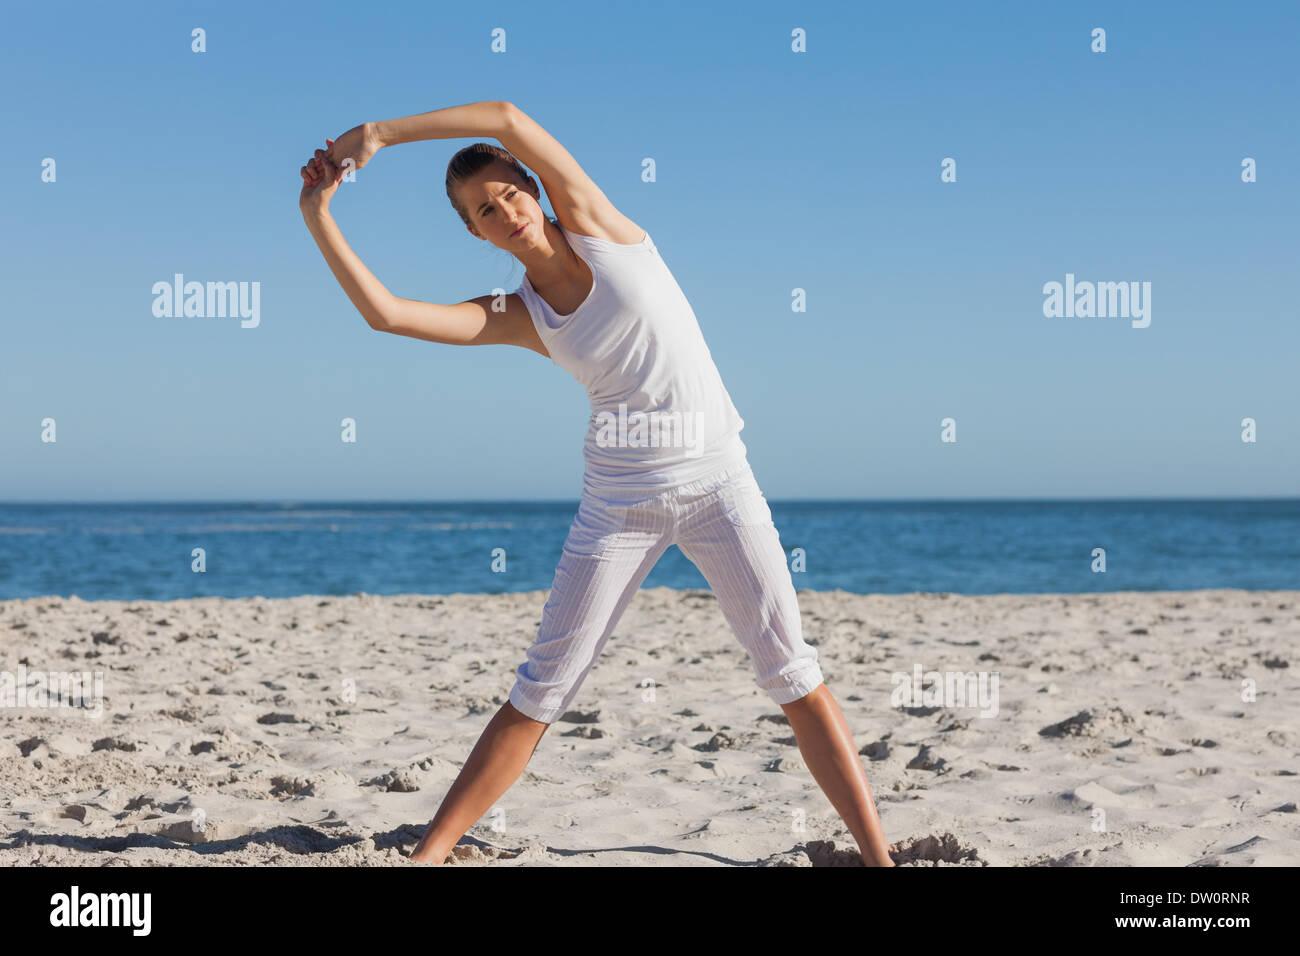 Woman stretching in yoga pose Stock Photo